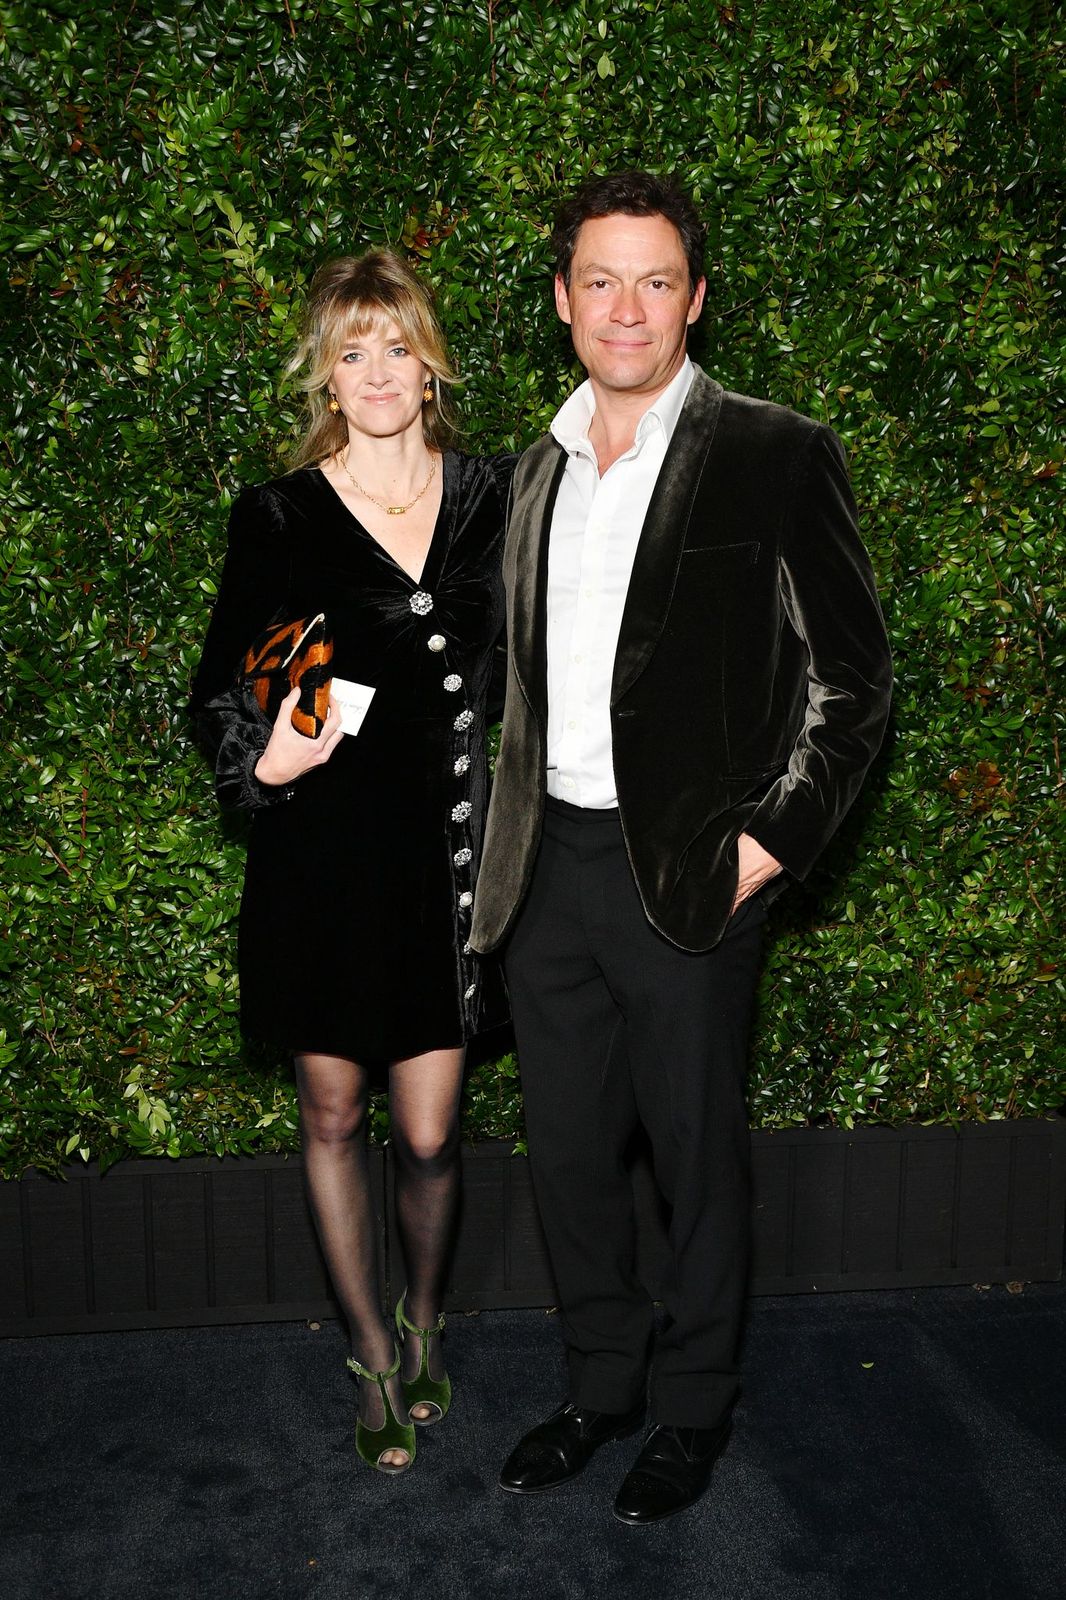 Catherine Fitzgerald and Dominic West at the Chanel And Charles Finch Pre-Oscar Awards Dinner on February 23, 2019, in Beverly Hills, California | Photo: Dia Dipasupil/WireImage/Getty Images